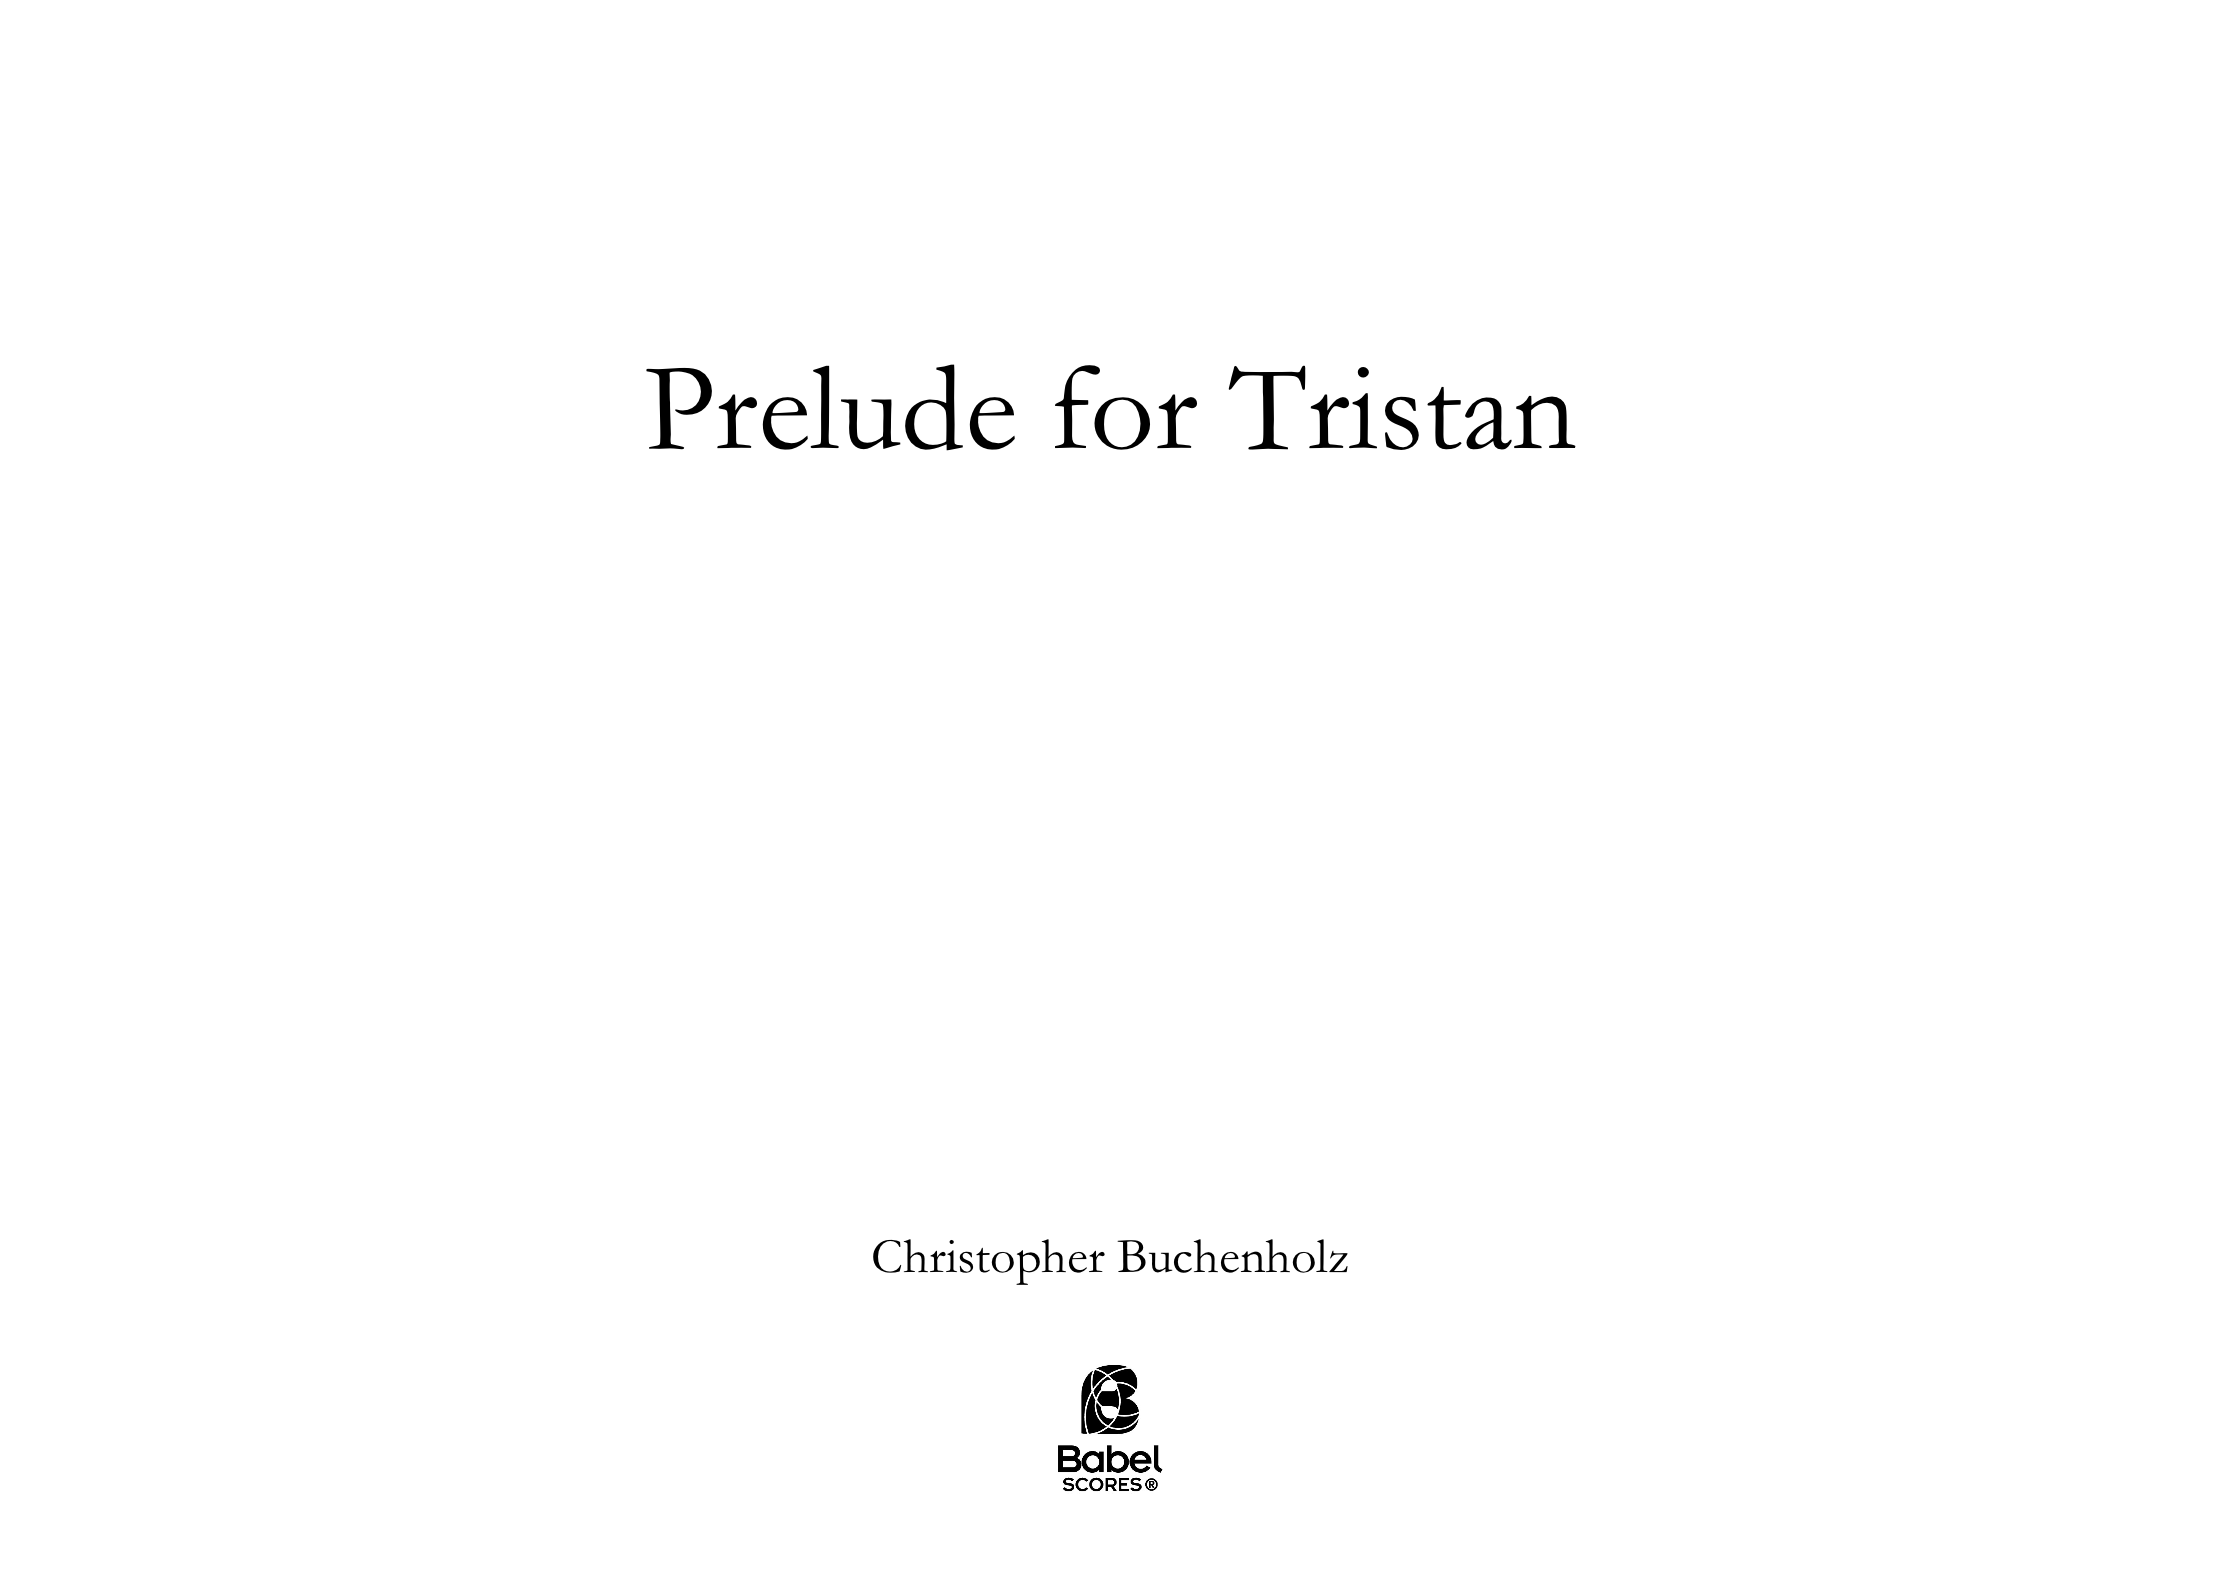 Prelude for Tristan A3 z 3 1 549